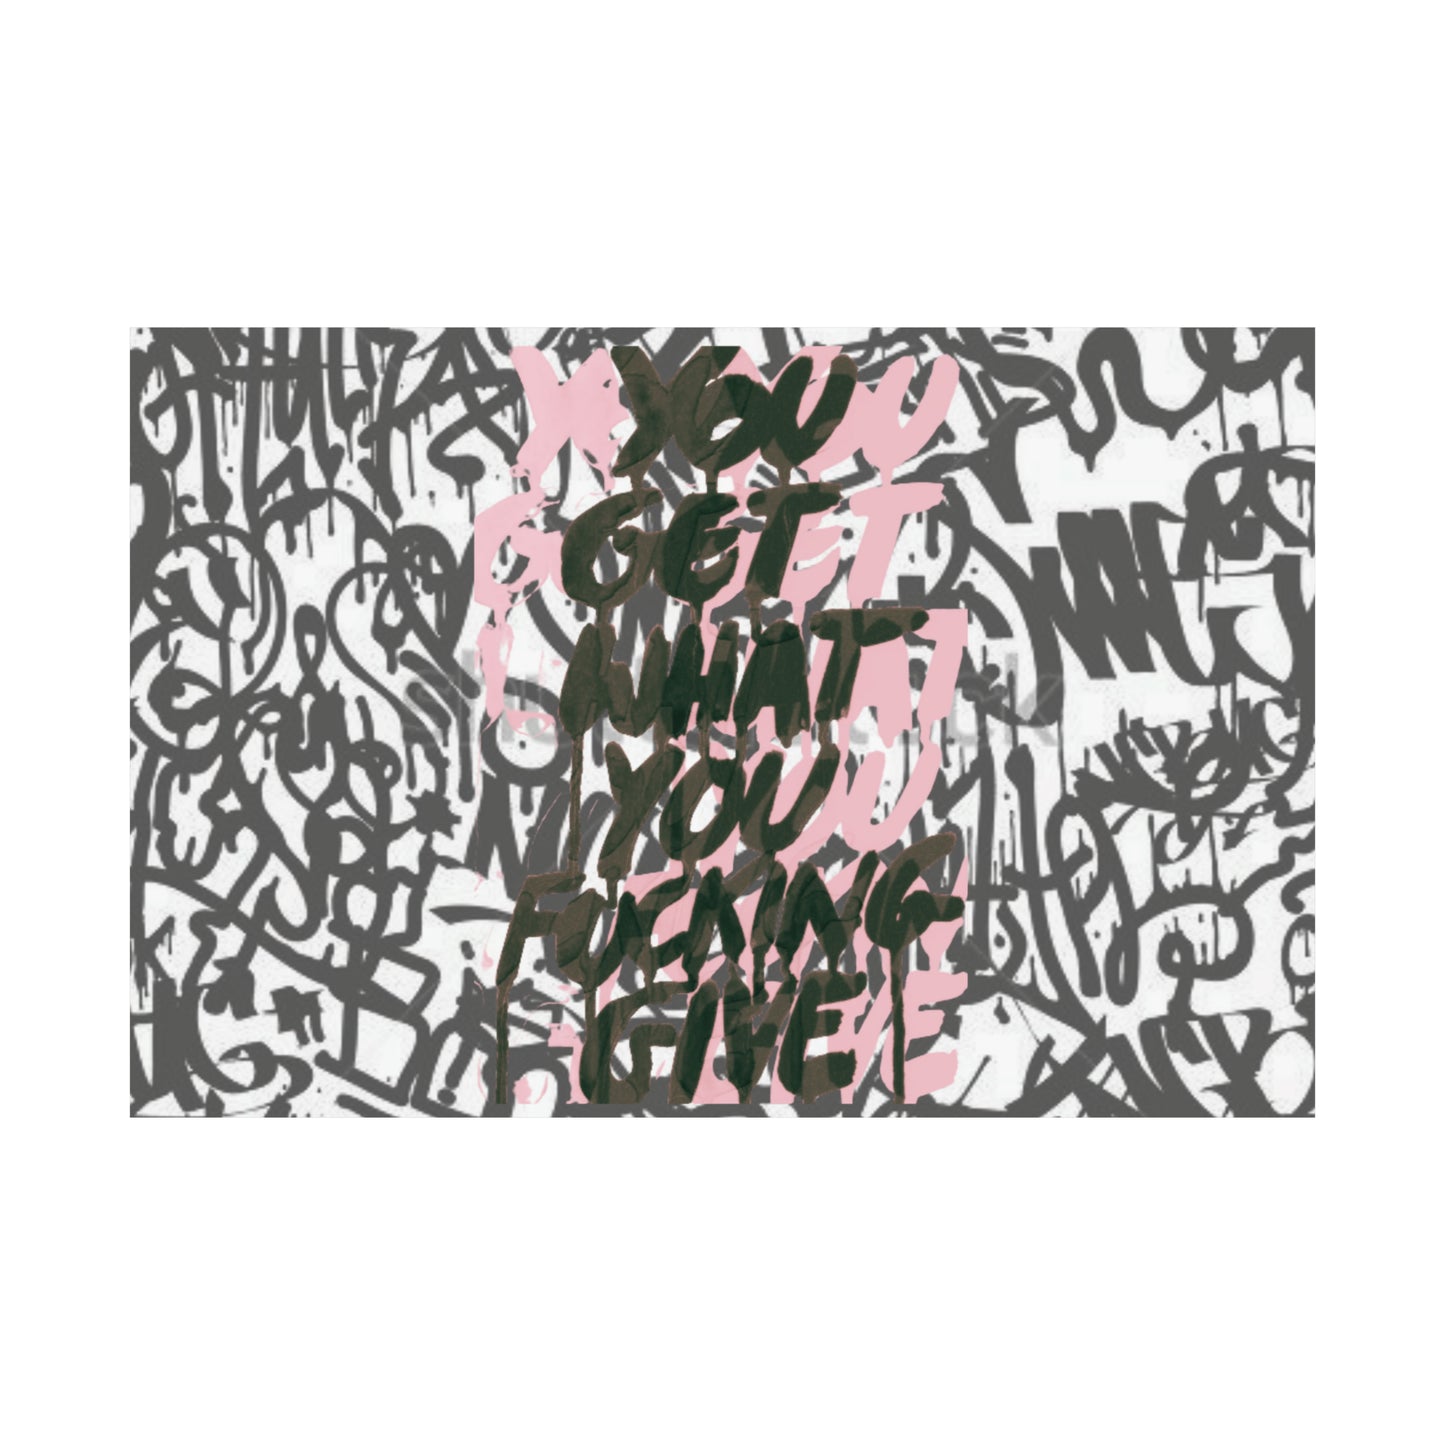 YouGetWhatYouGive AmplifyDestroy Print Poster